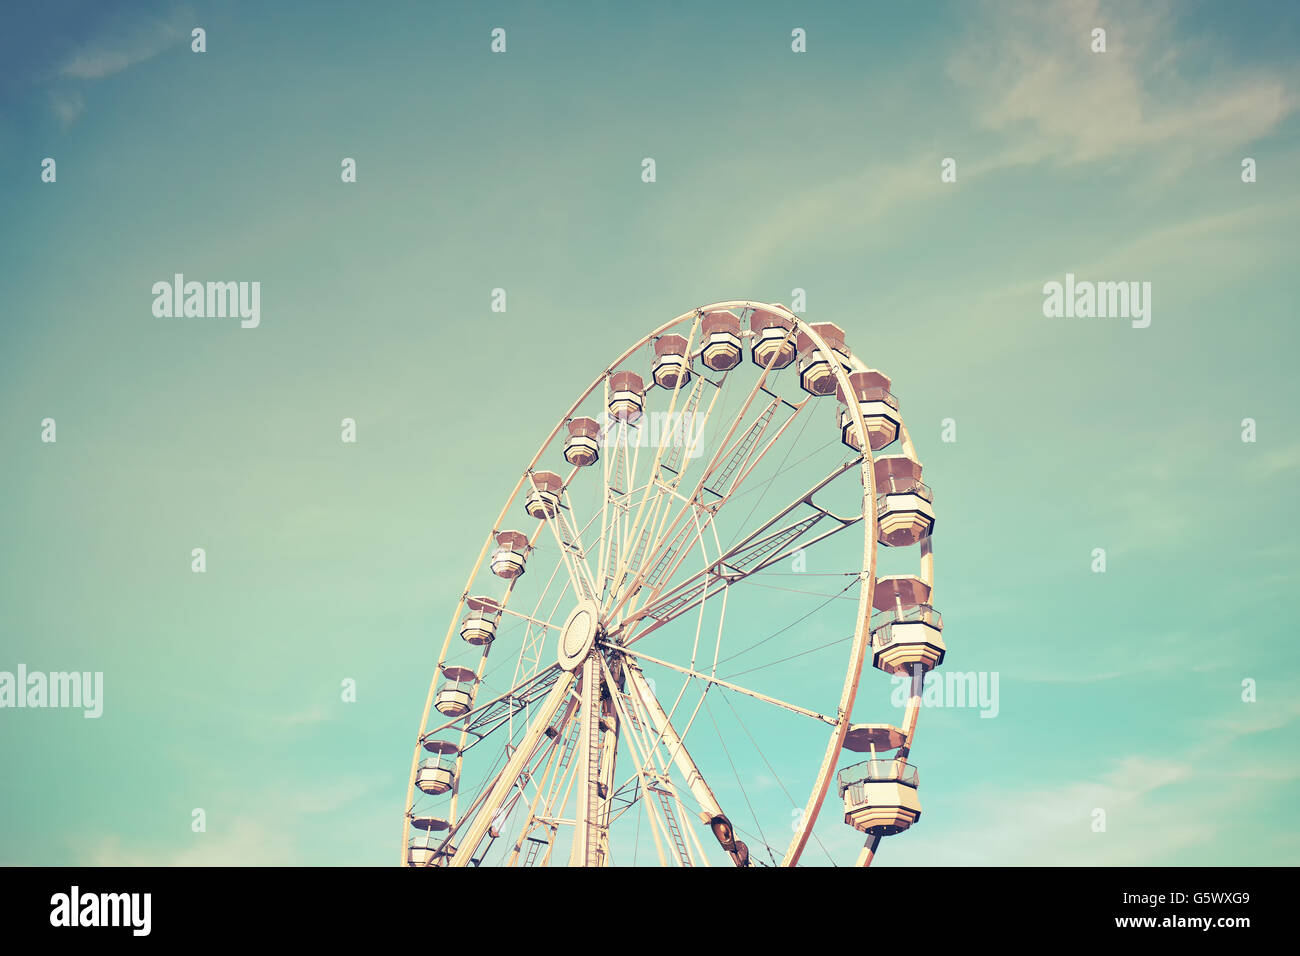 Retro toned picture of a Ferris wheel at sunset. Stock Photo